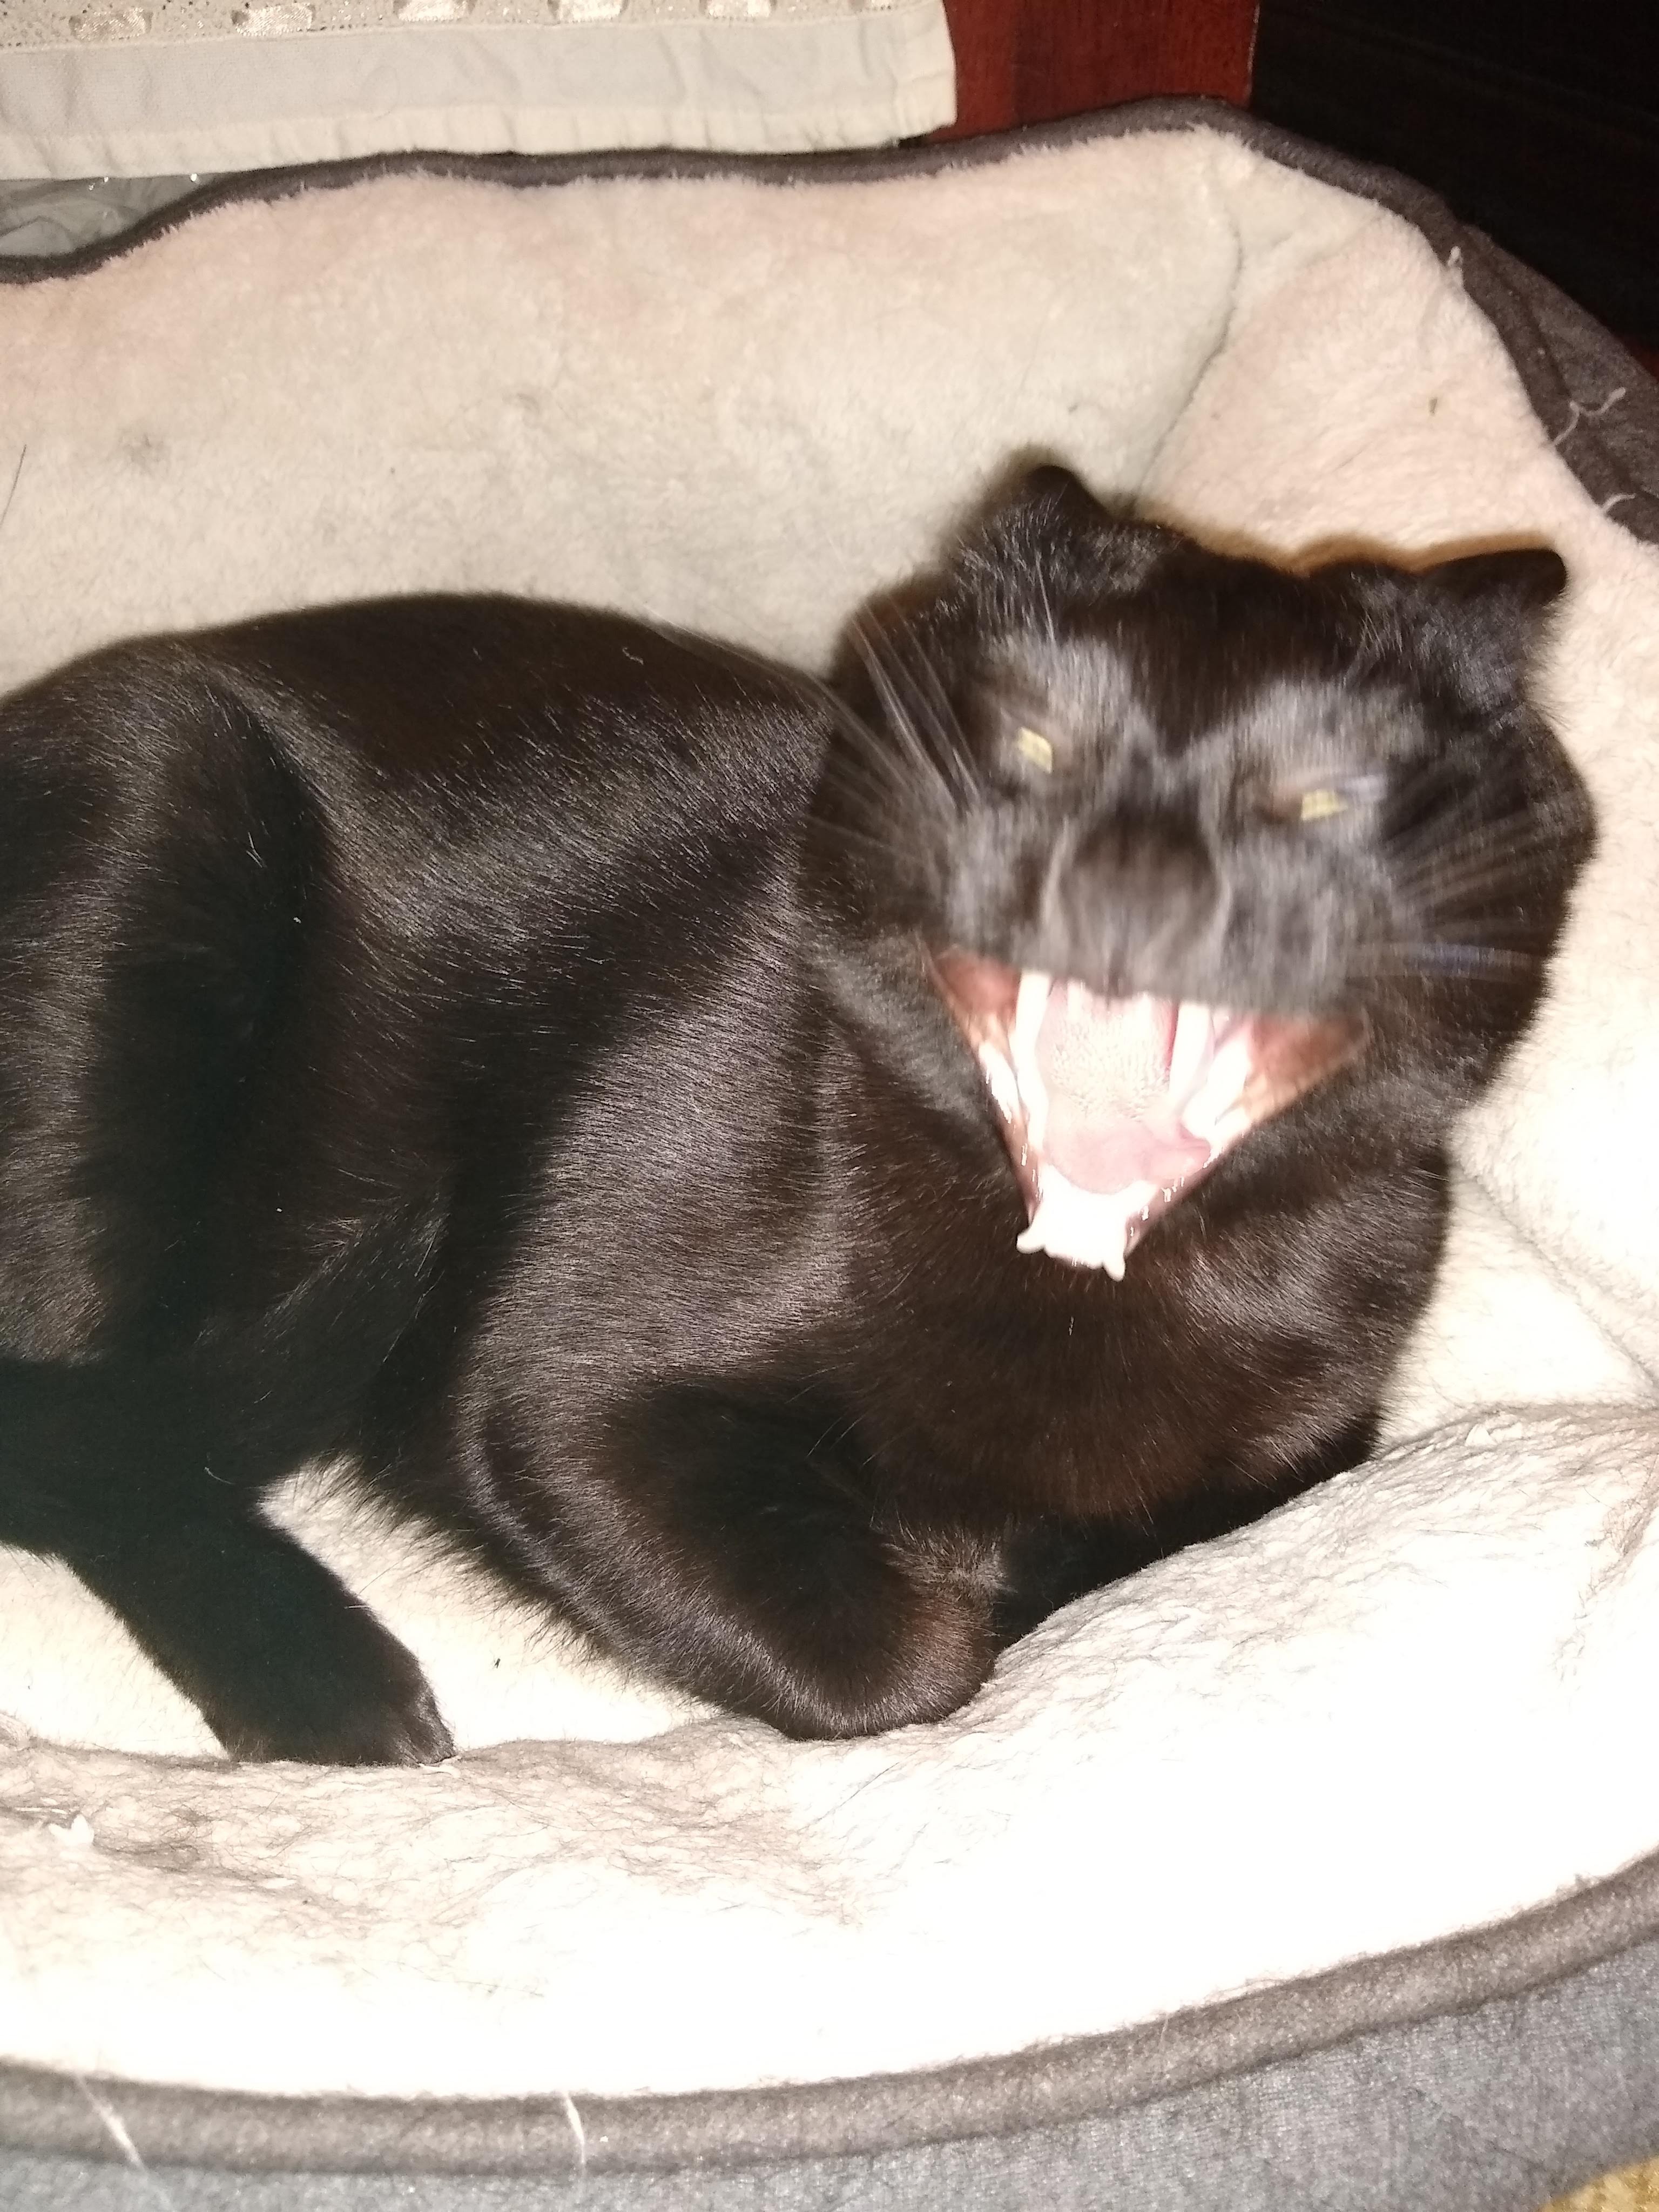 A photo of a black cat. He yawned while the photo was taken, making his expression a blurry mess of teeth spread in a weird grin. End ID.